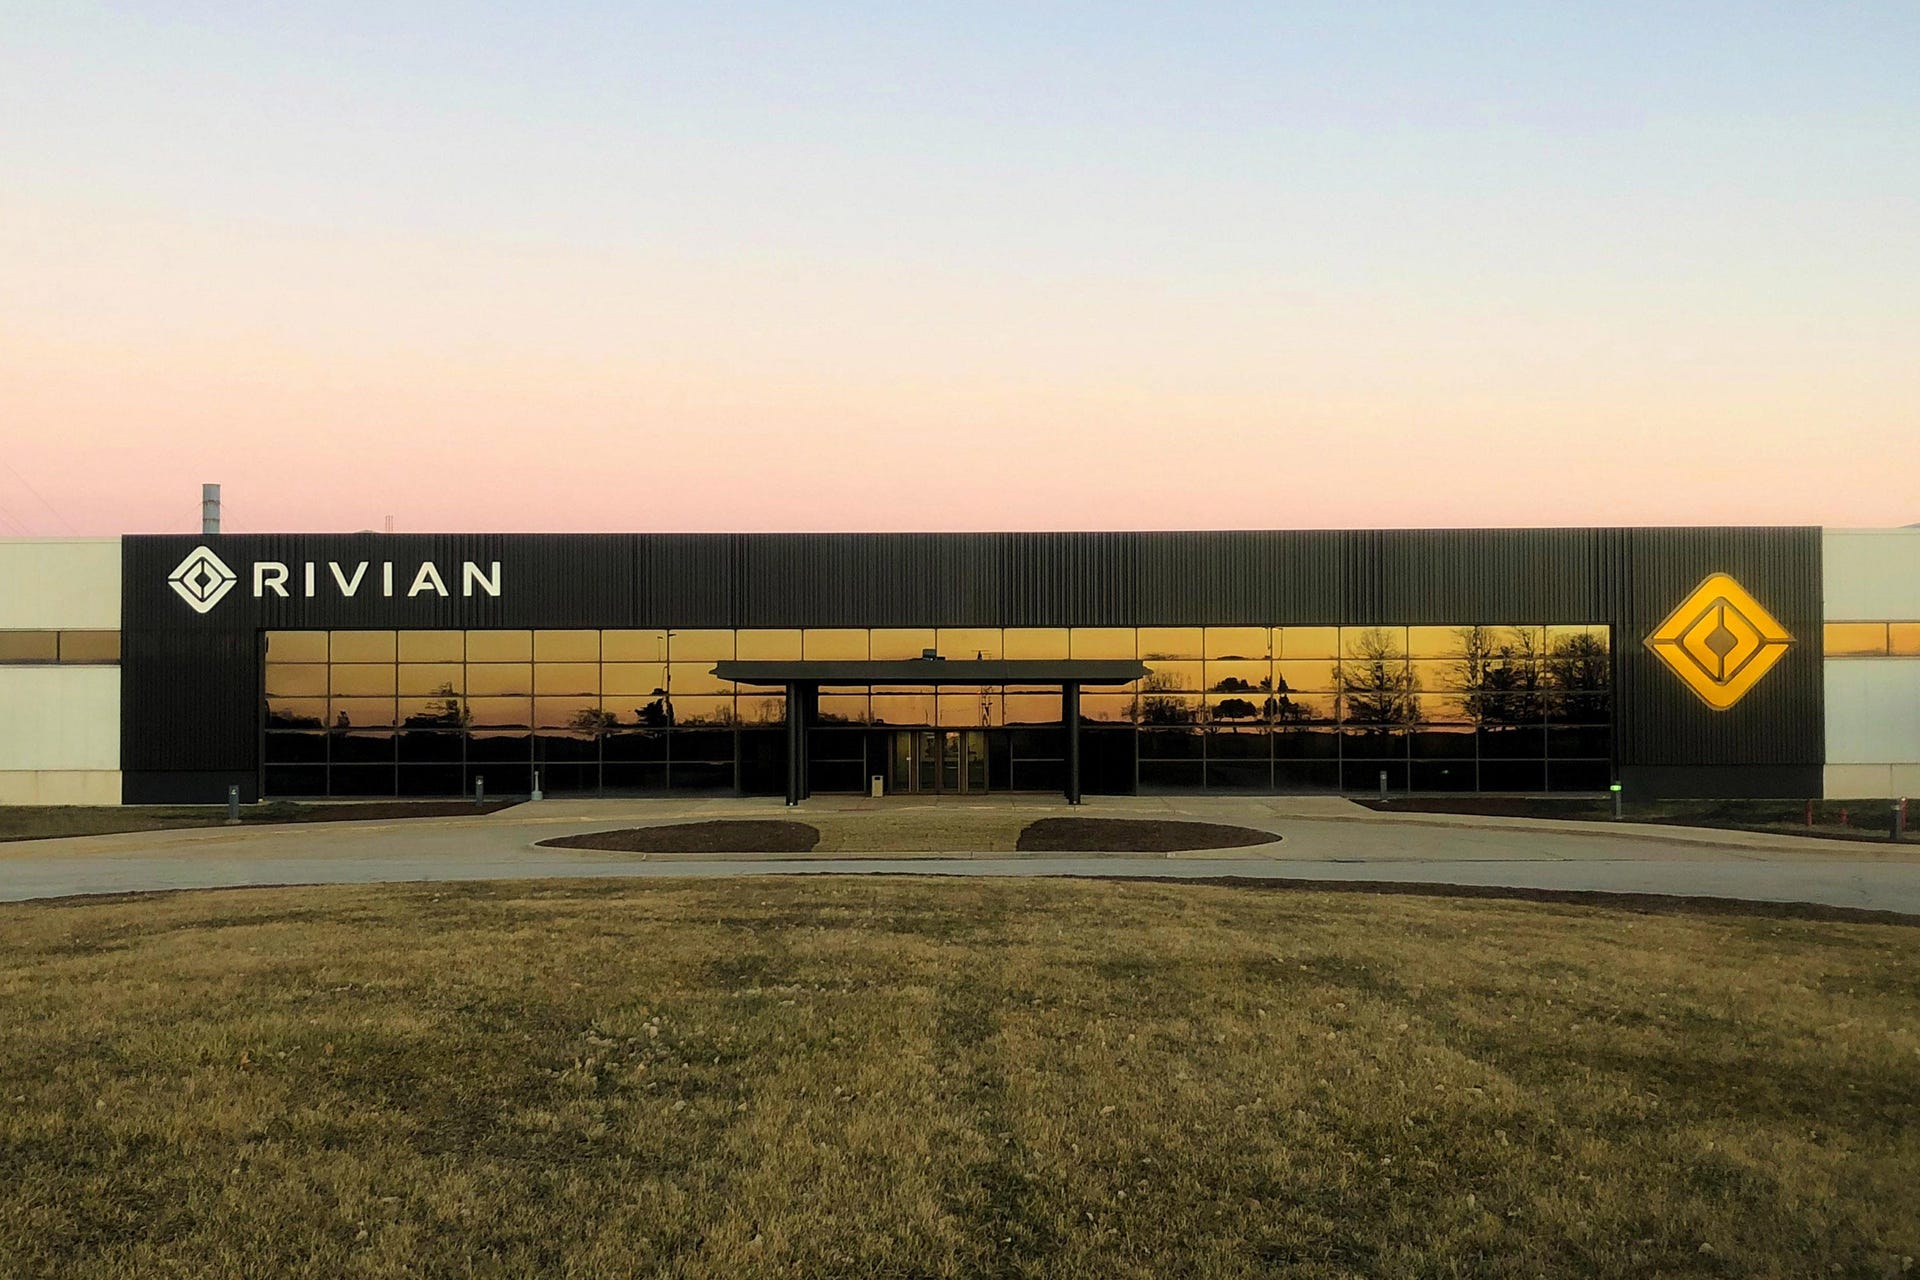 Rivian manufacturing facility in Normal, Illinois